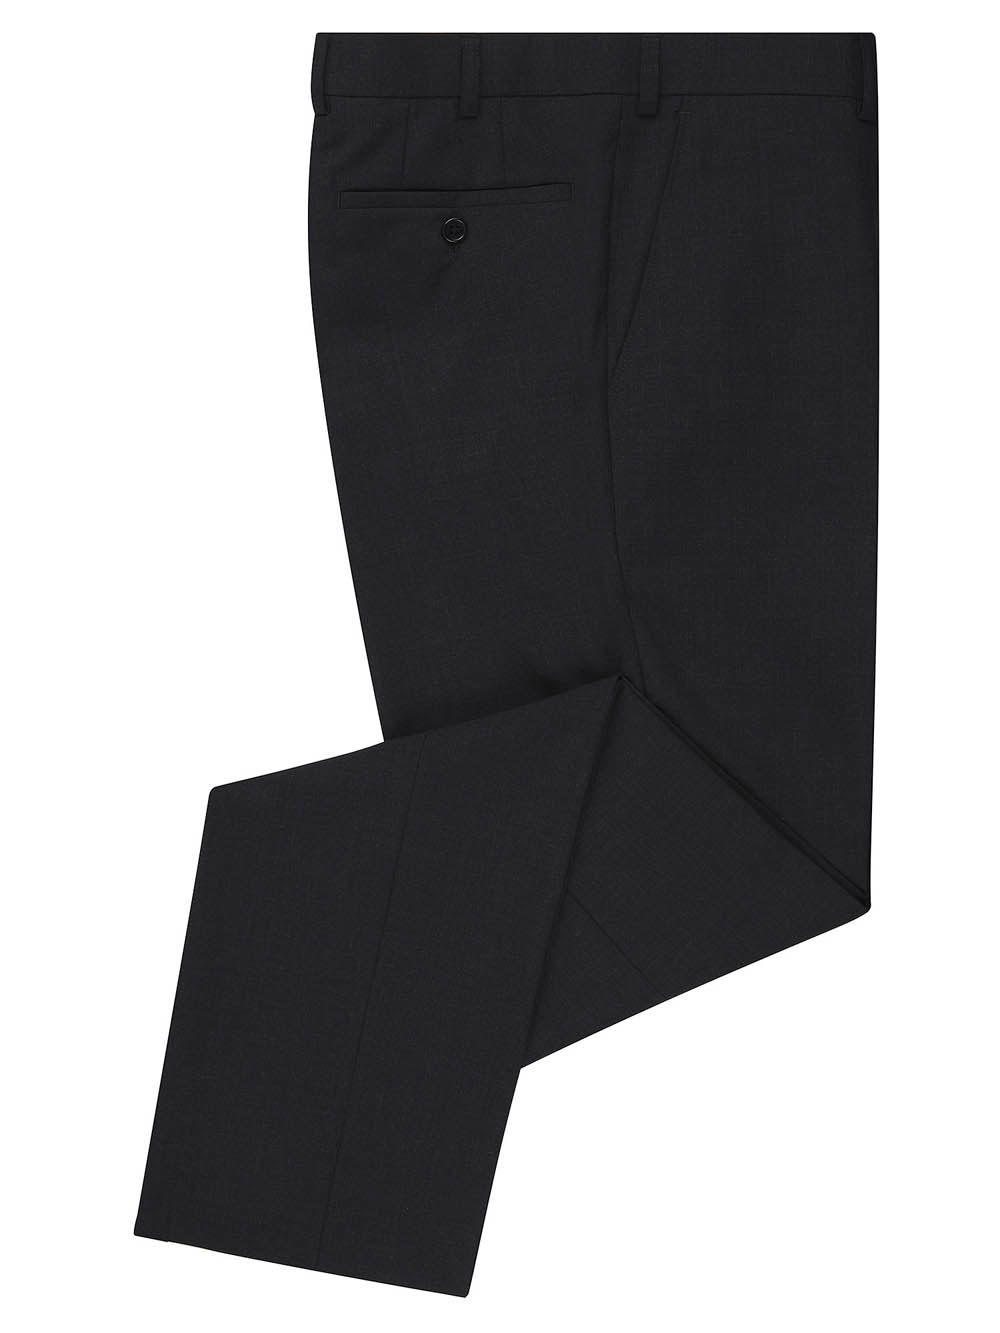 Men's Cotton Blend Charcoal Grey Formal Trousers - Sojanya | Business  casual men, Classic trousers, Charcoal grey